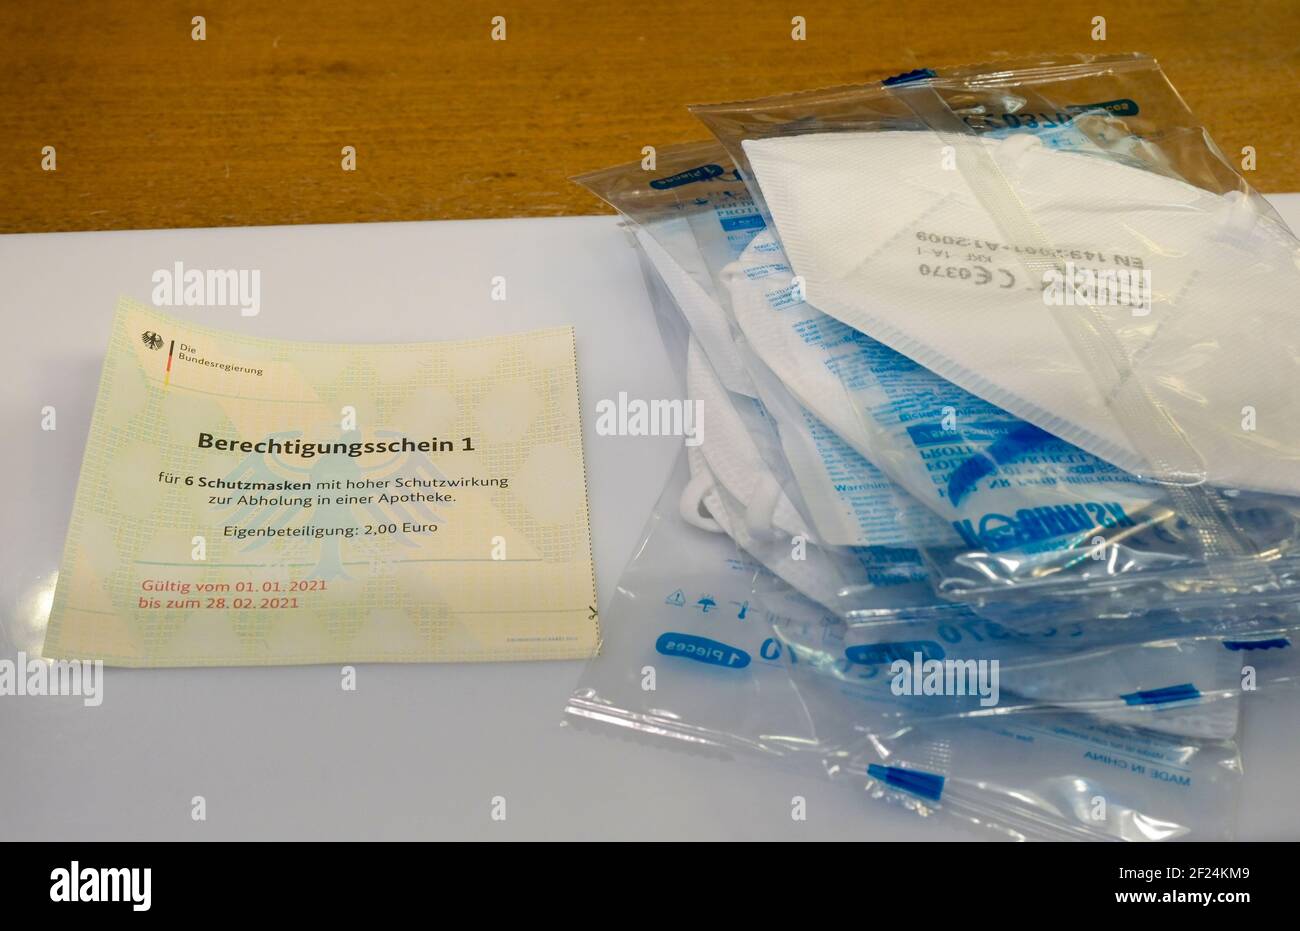 GERMANY, Hamburg, corona pandemic, dispensary, drug store, distribution of free masks for old people with entitlement certificate by german government Stock Photo